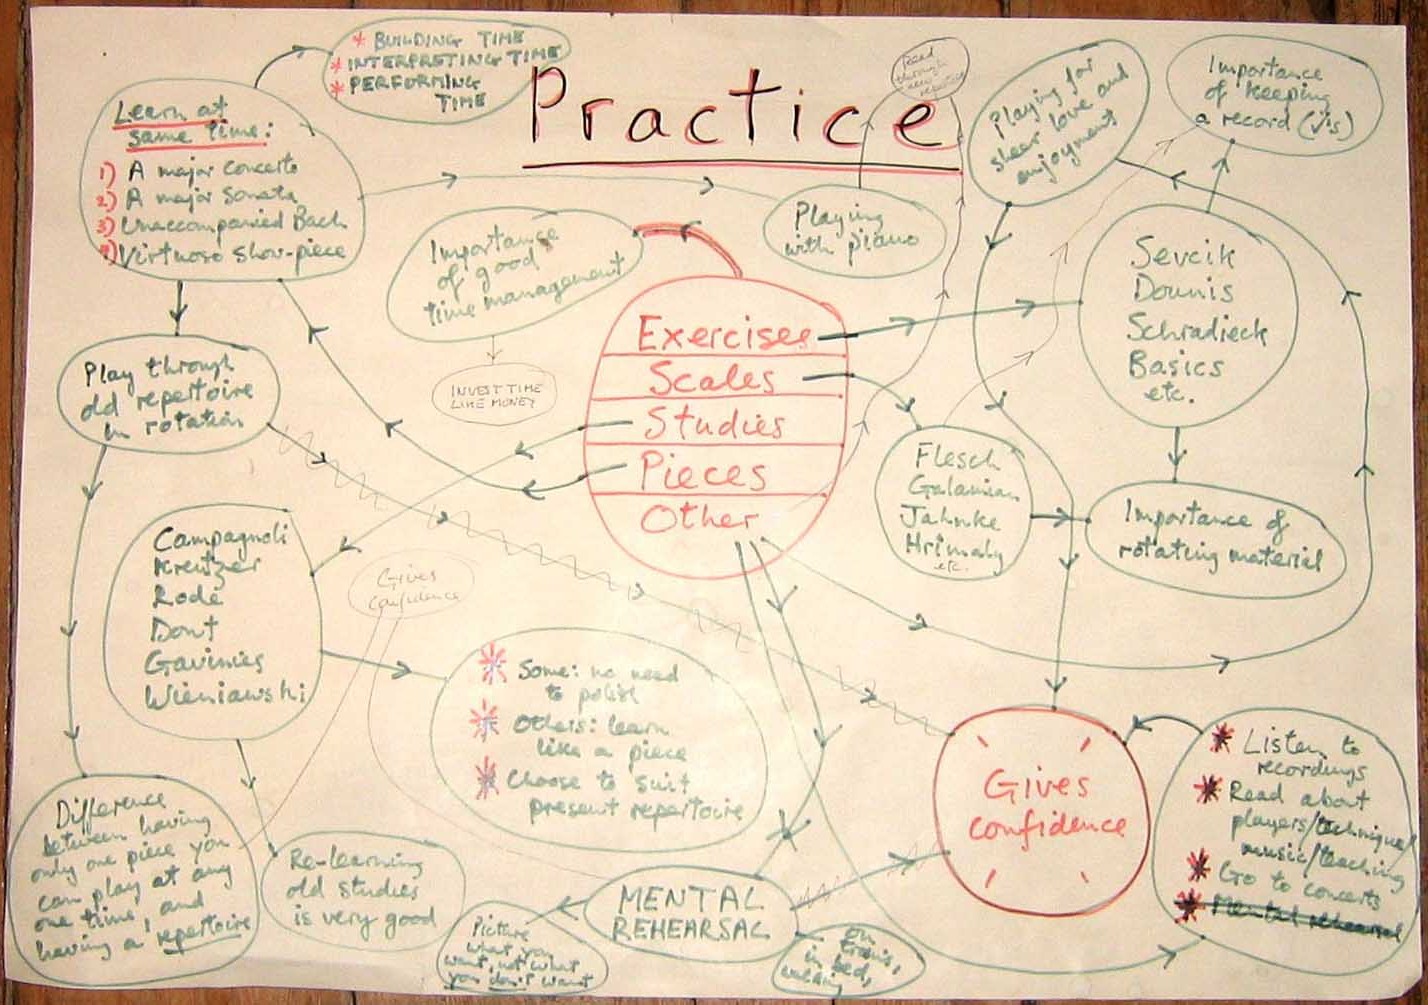 Stage two: The main phase of practice